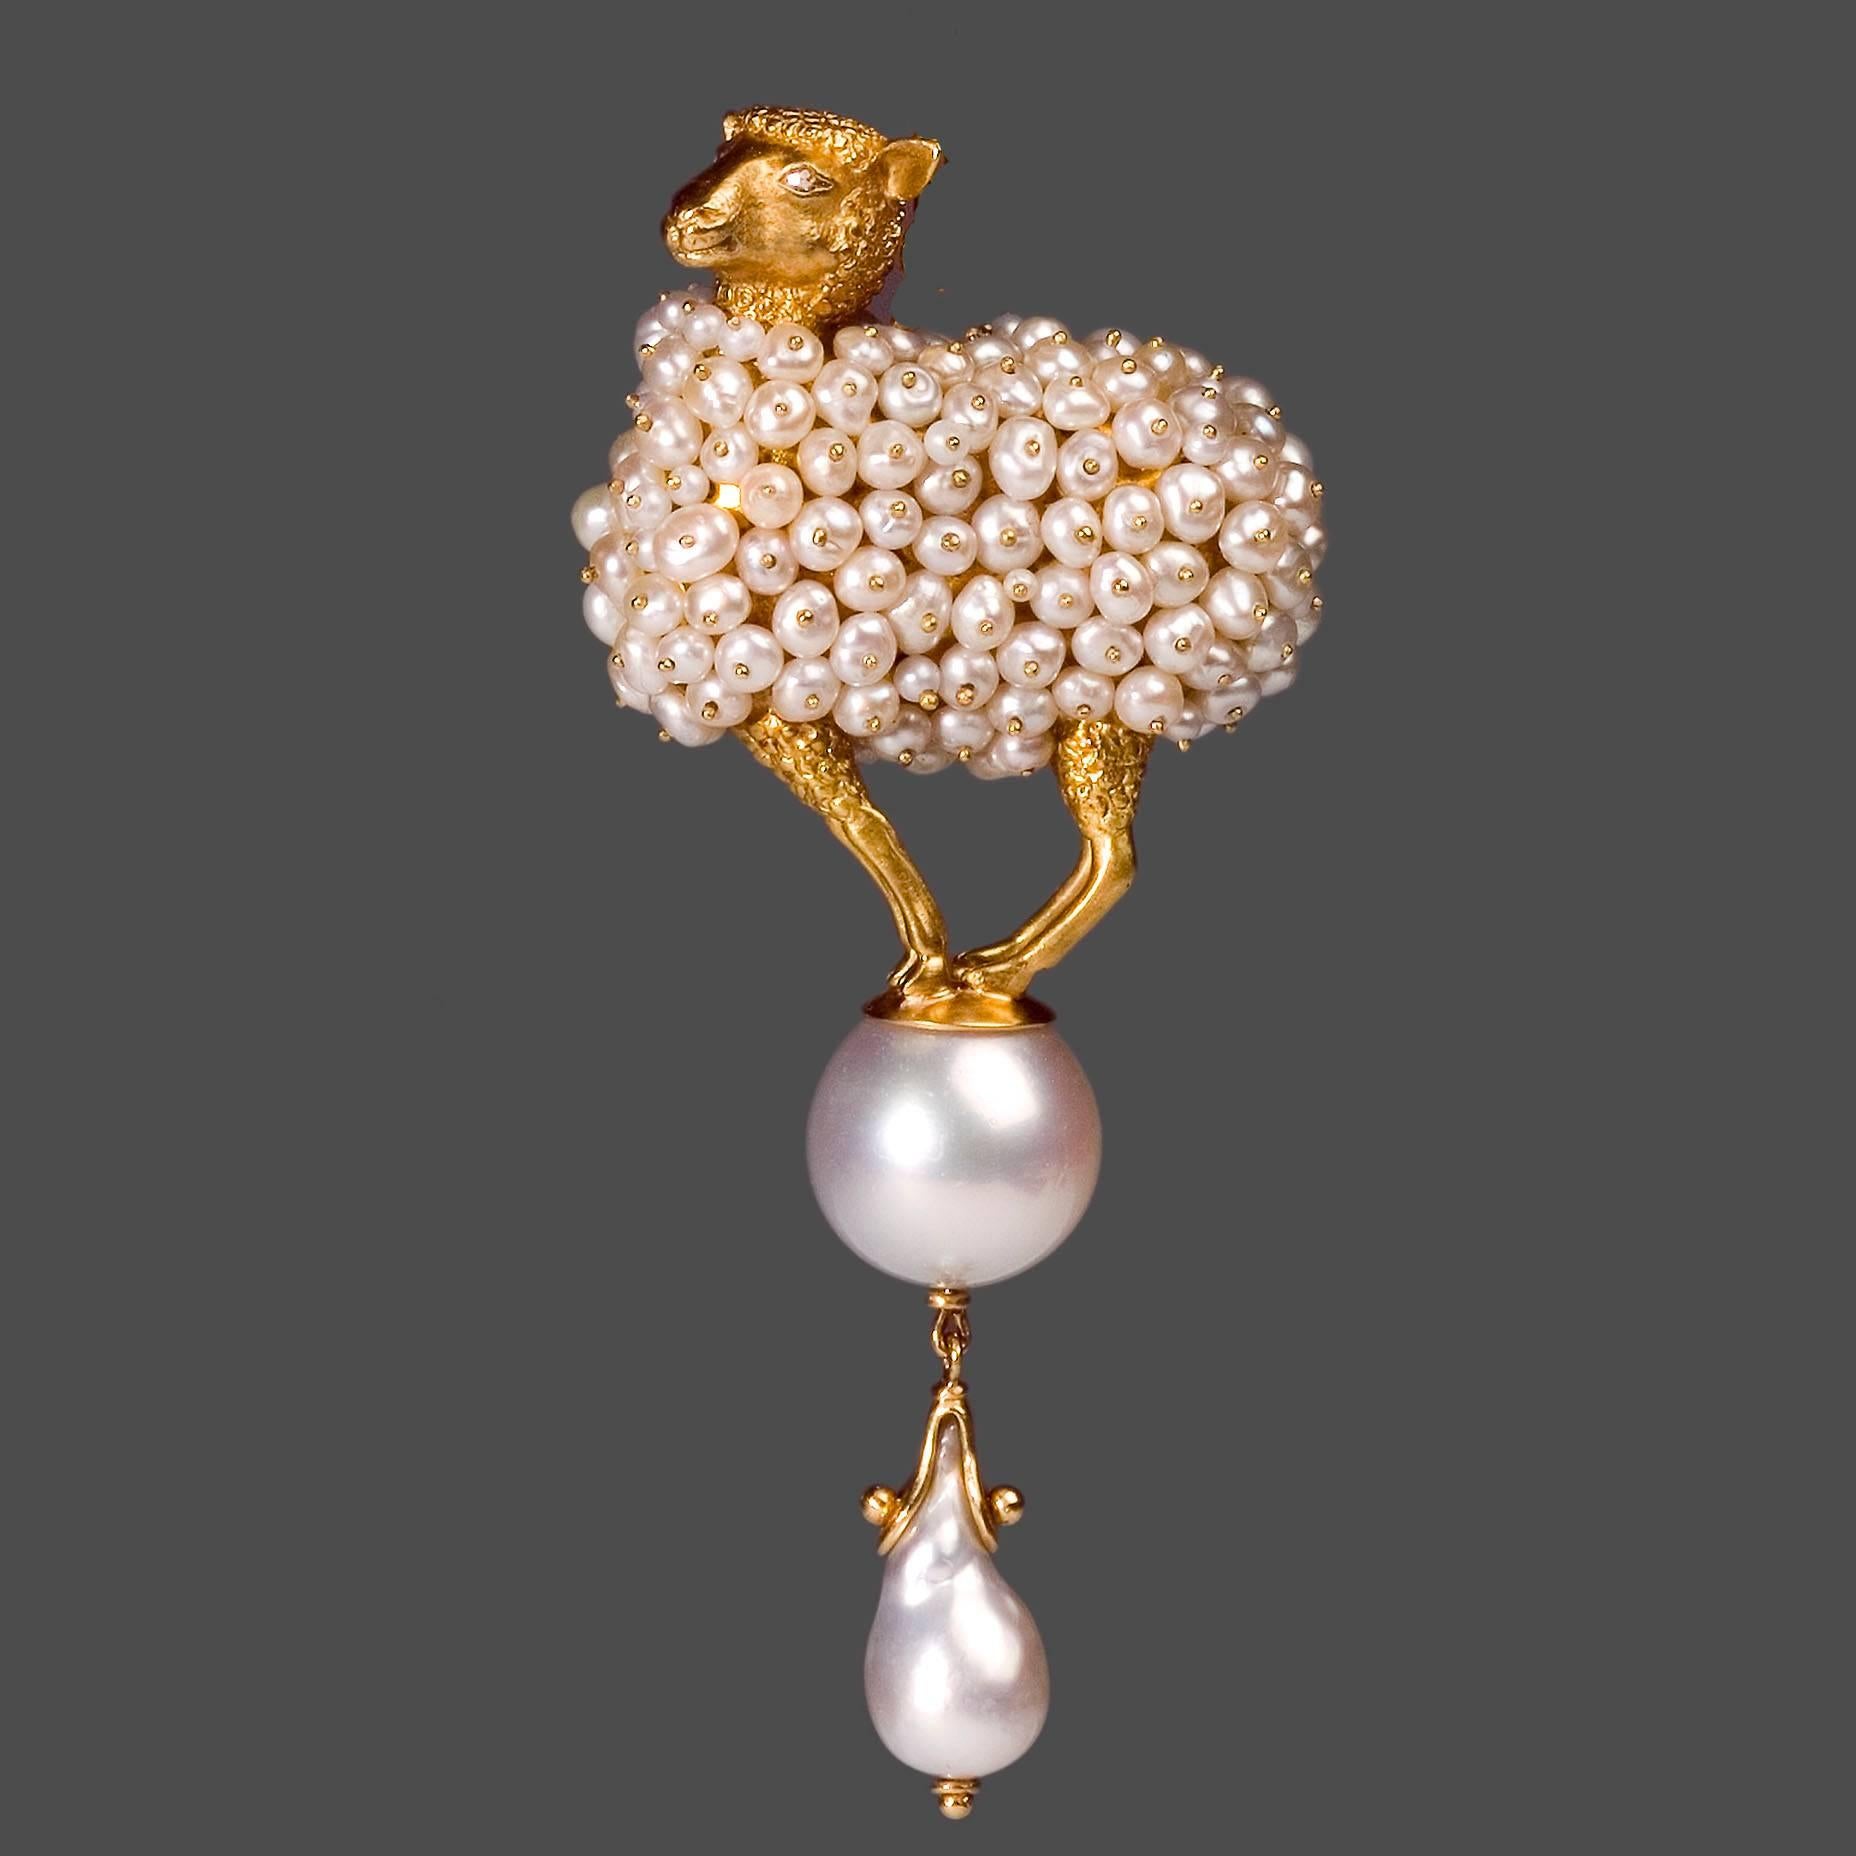 Baroque Ark Design, Diamond Eyes, Yellow Gold and Pearls Pendant Brooch For Sale